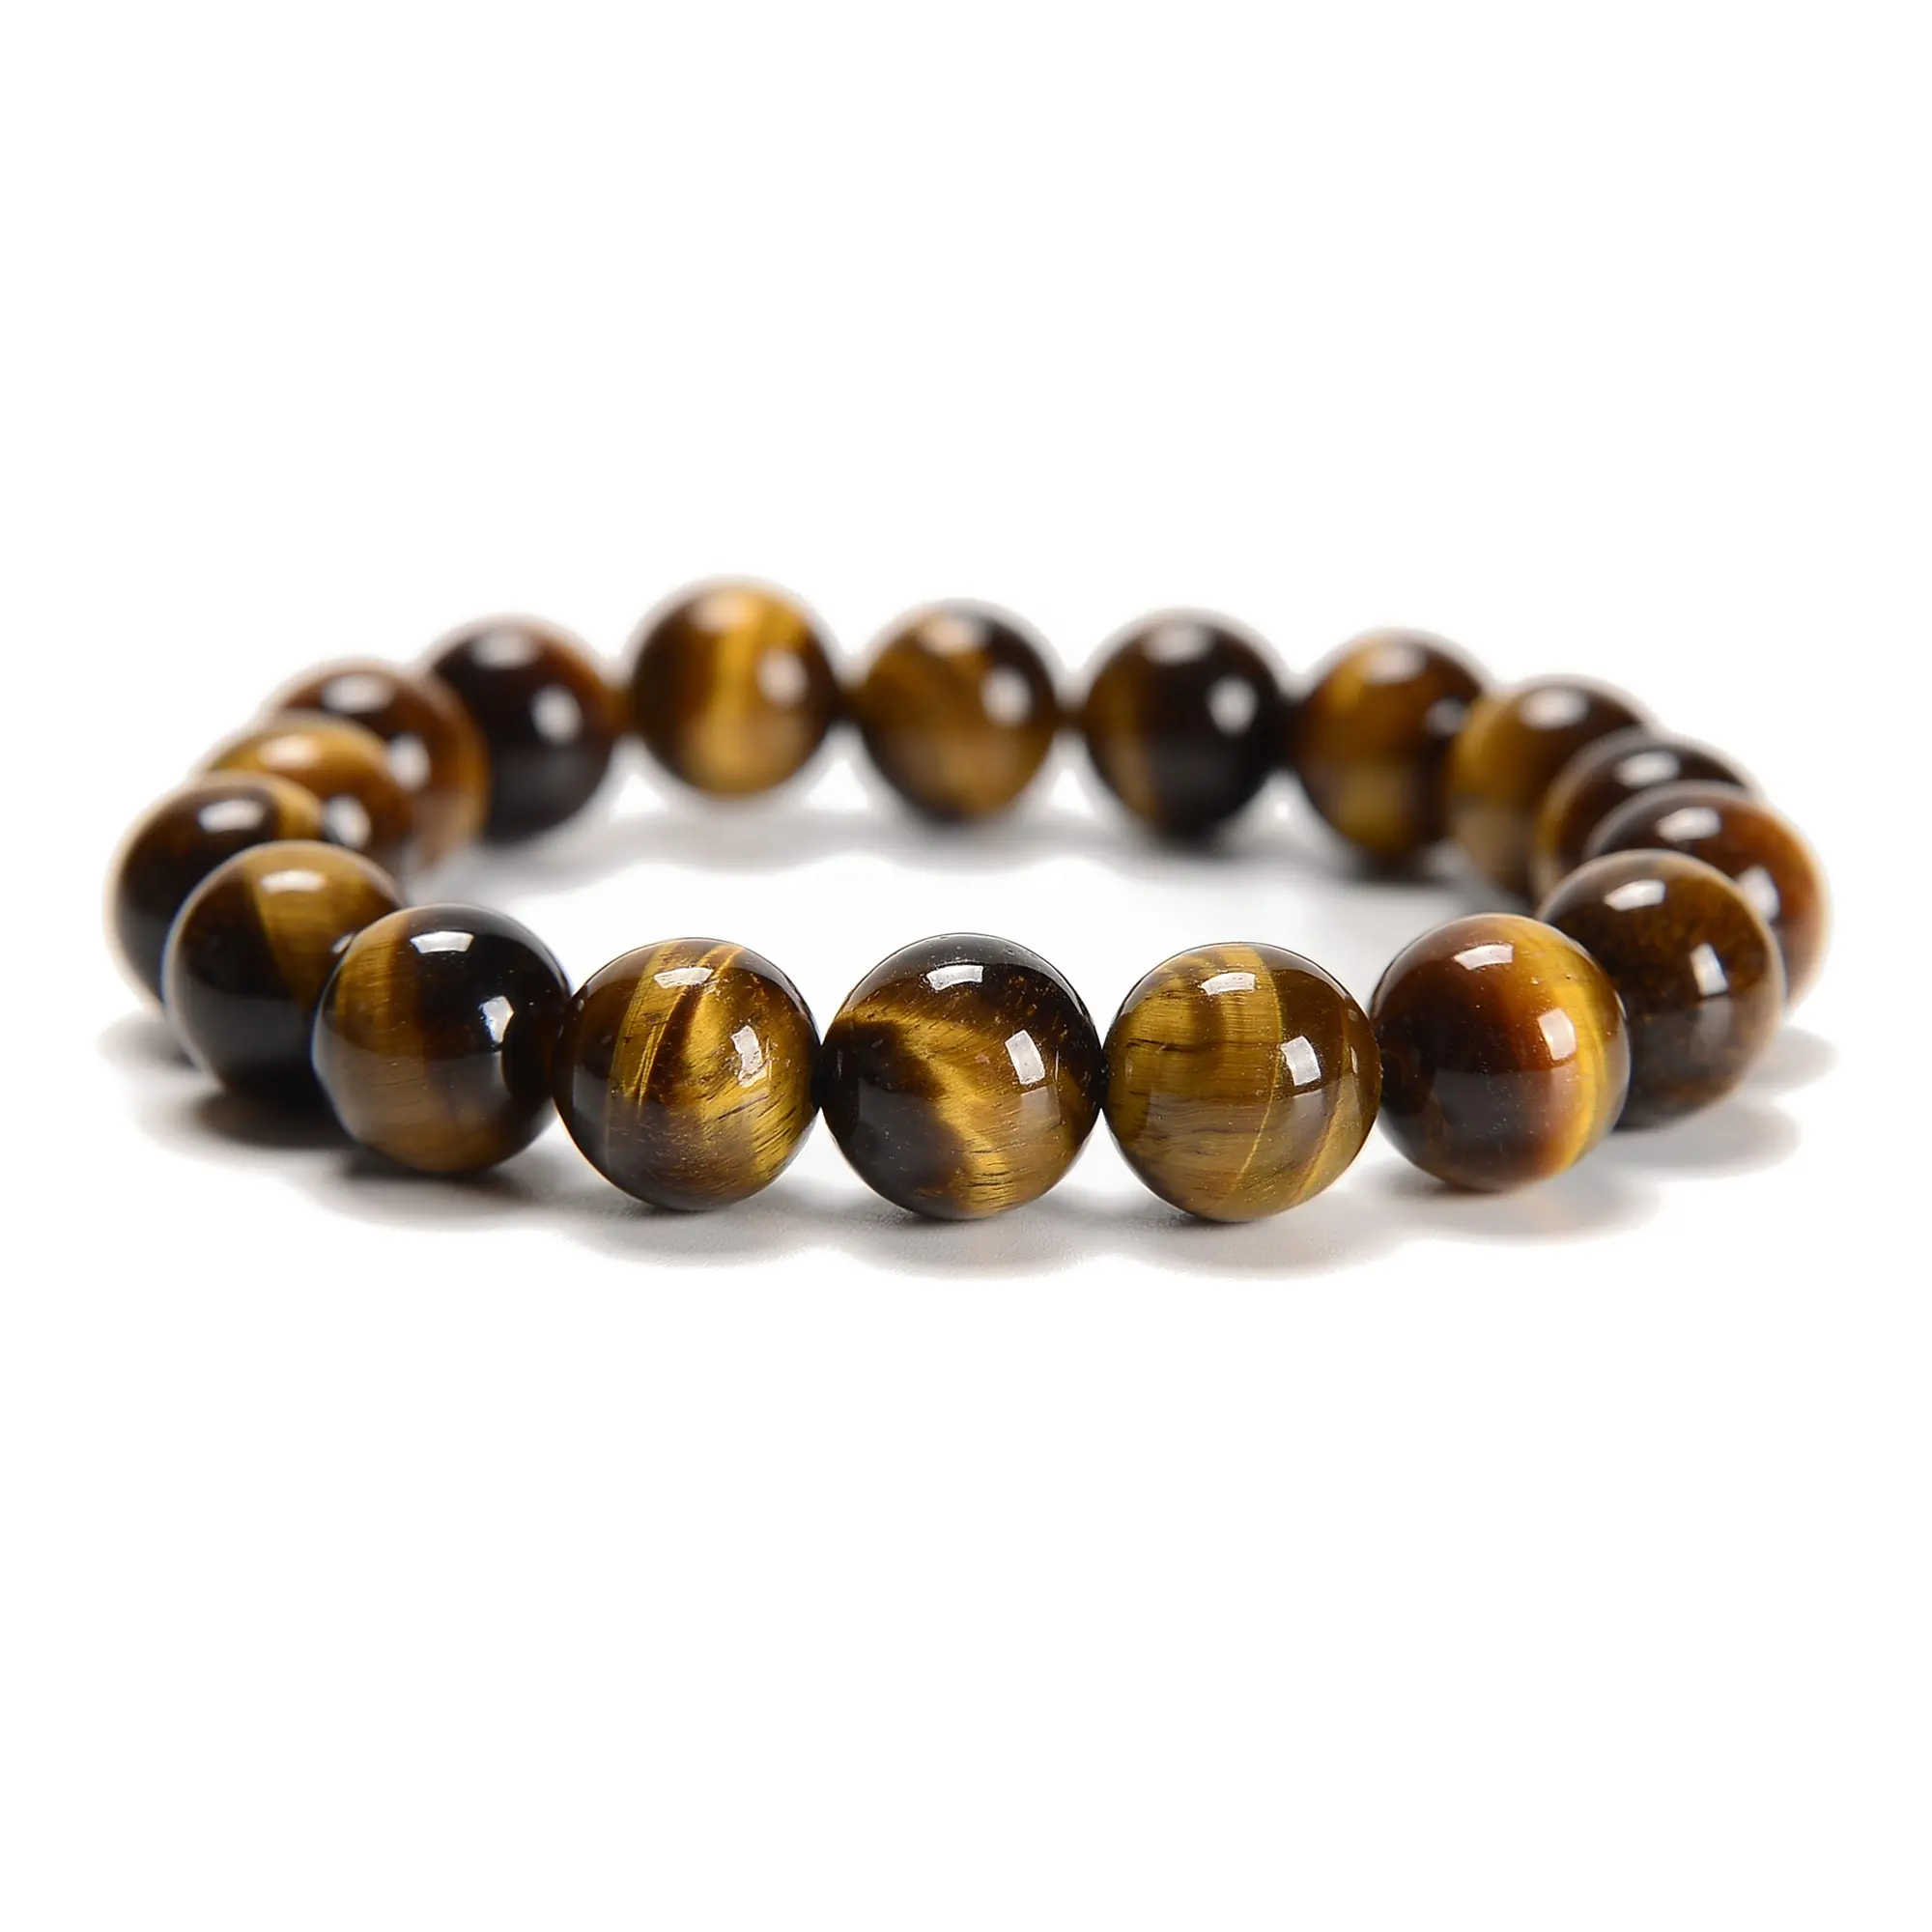 Hot Sale AB Grade Yellow Tiger Eye Smooth Round Beaded Bracelets Size 6mm 8mm 10mm for Men and Women